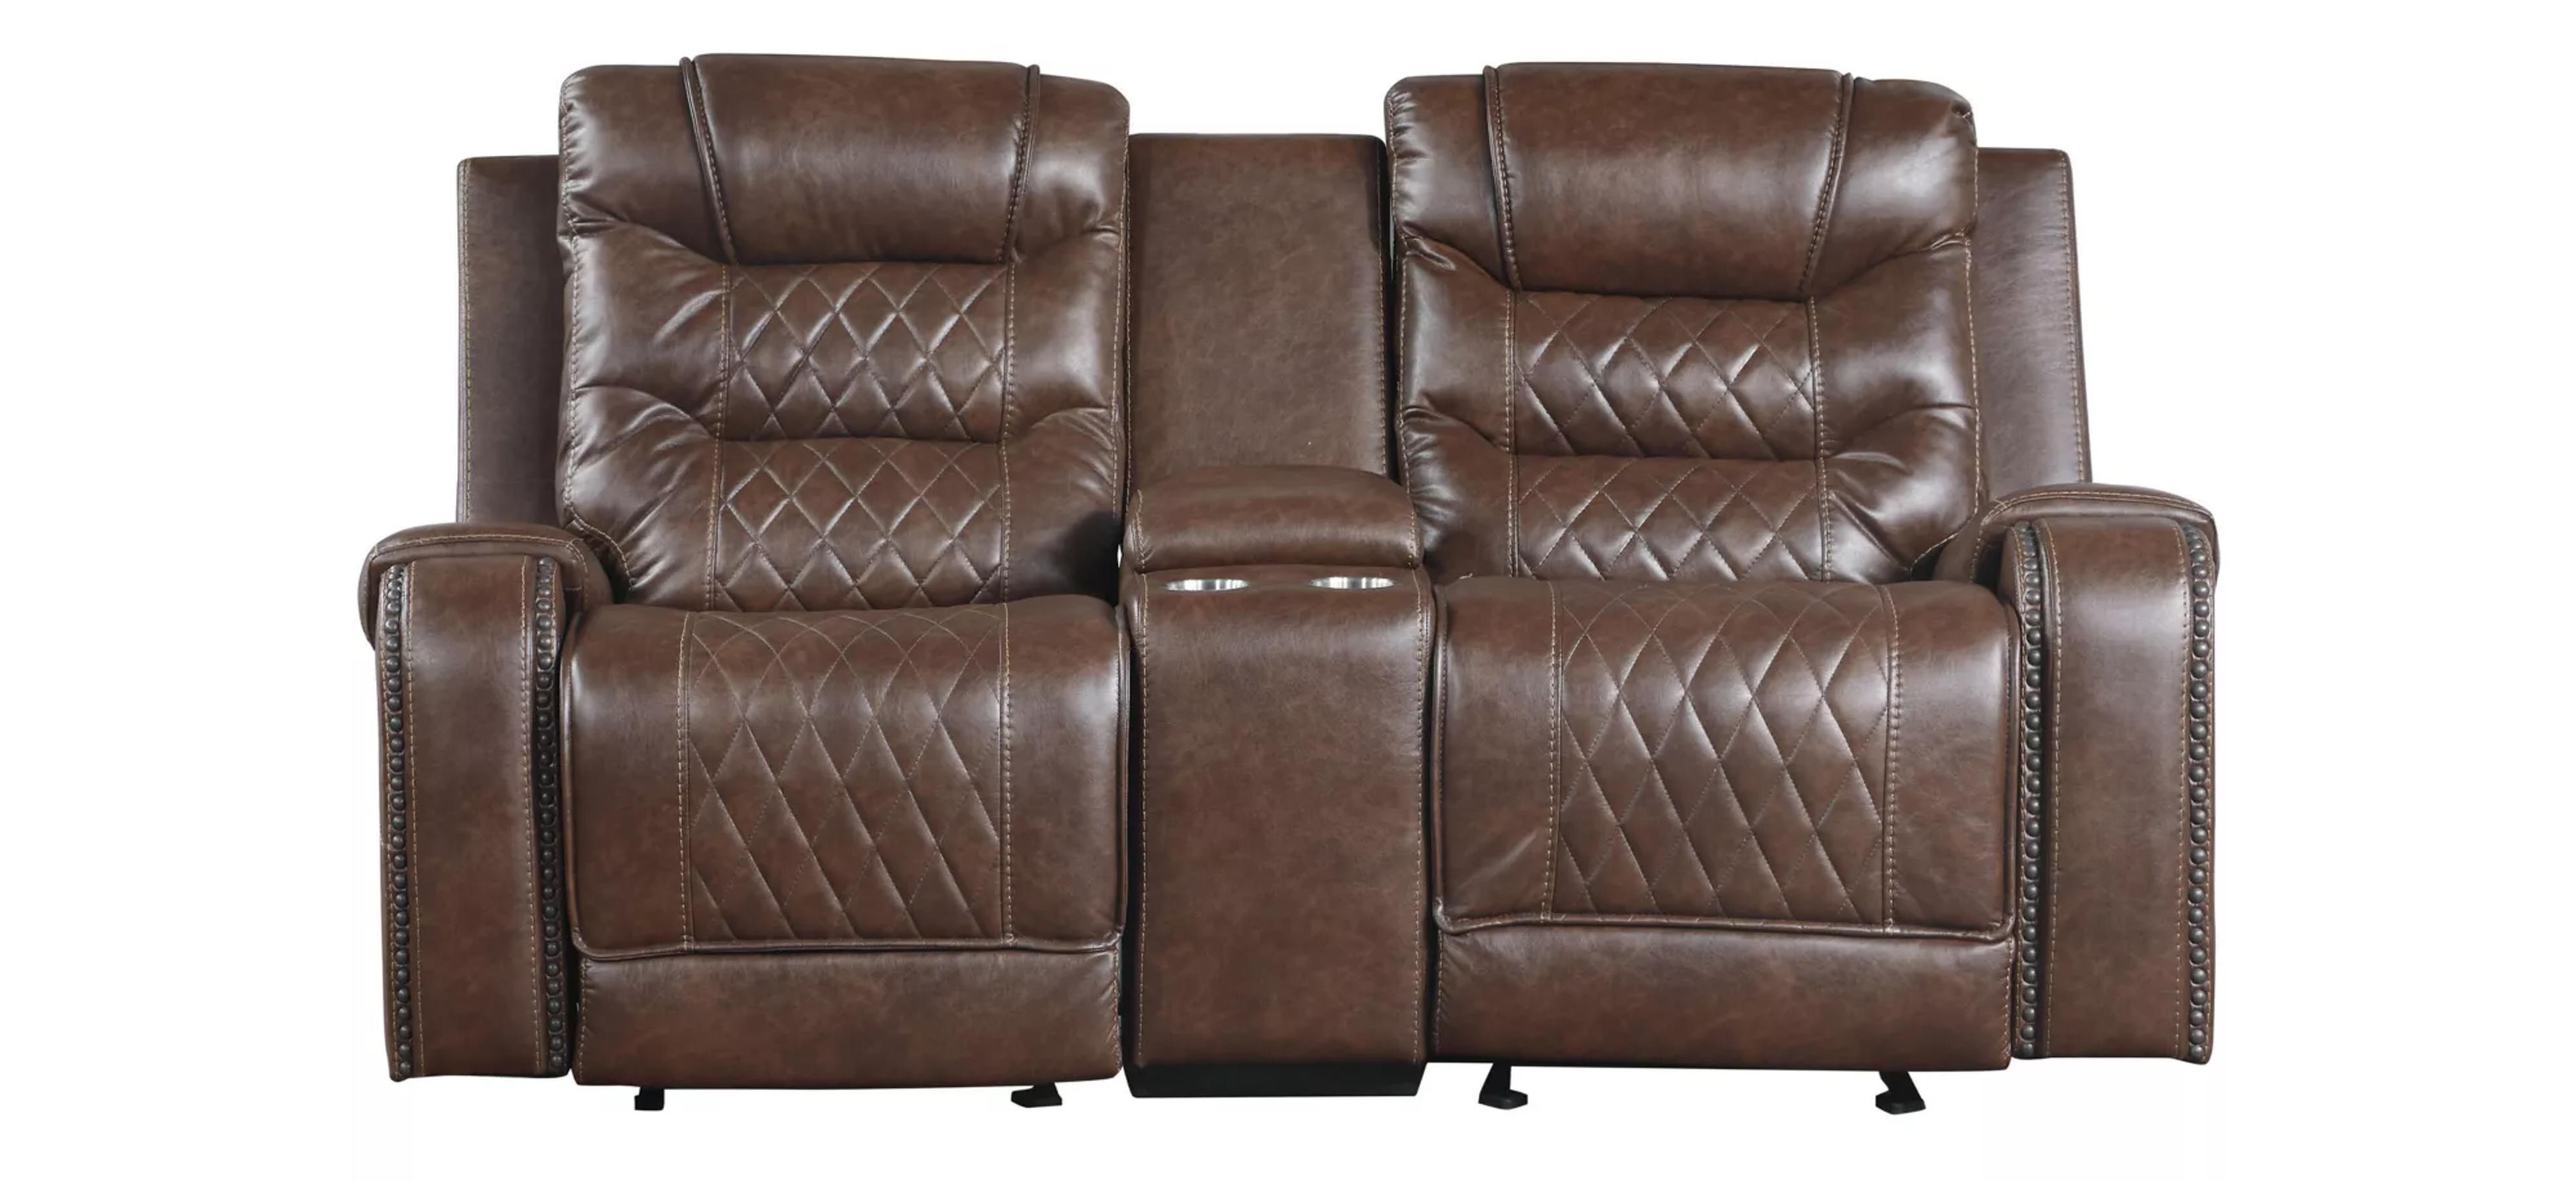 Greenway Double Glider Reclining Console Loveseat w/ USB | Raymour & Flanigan